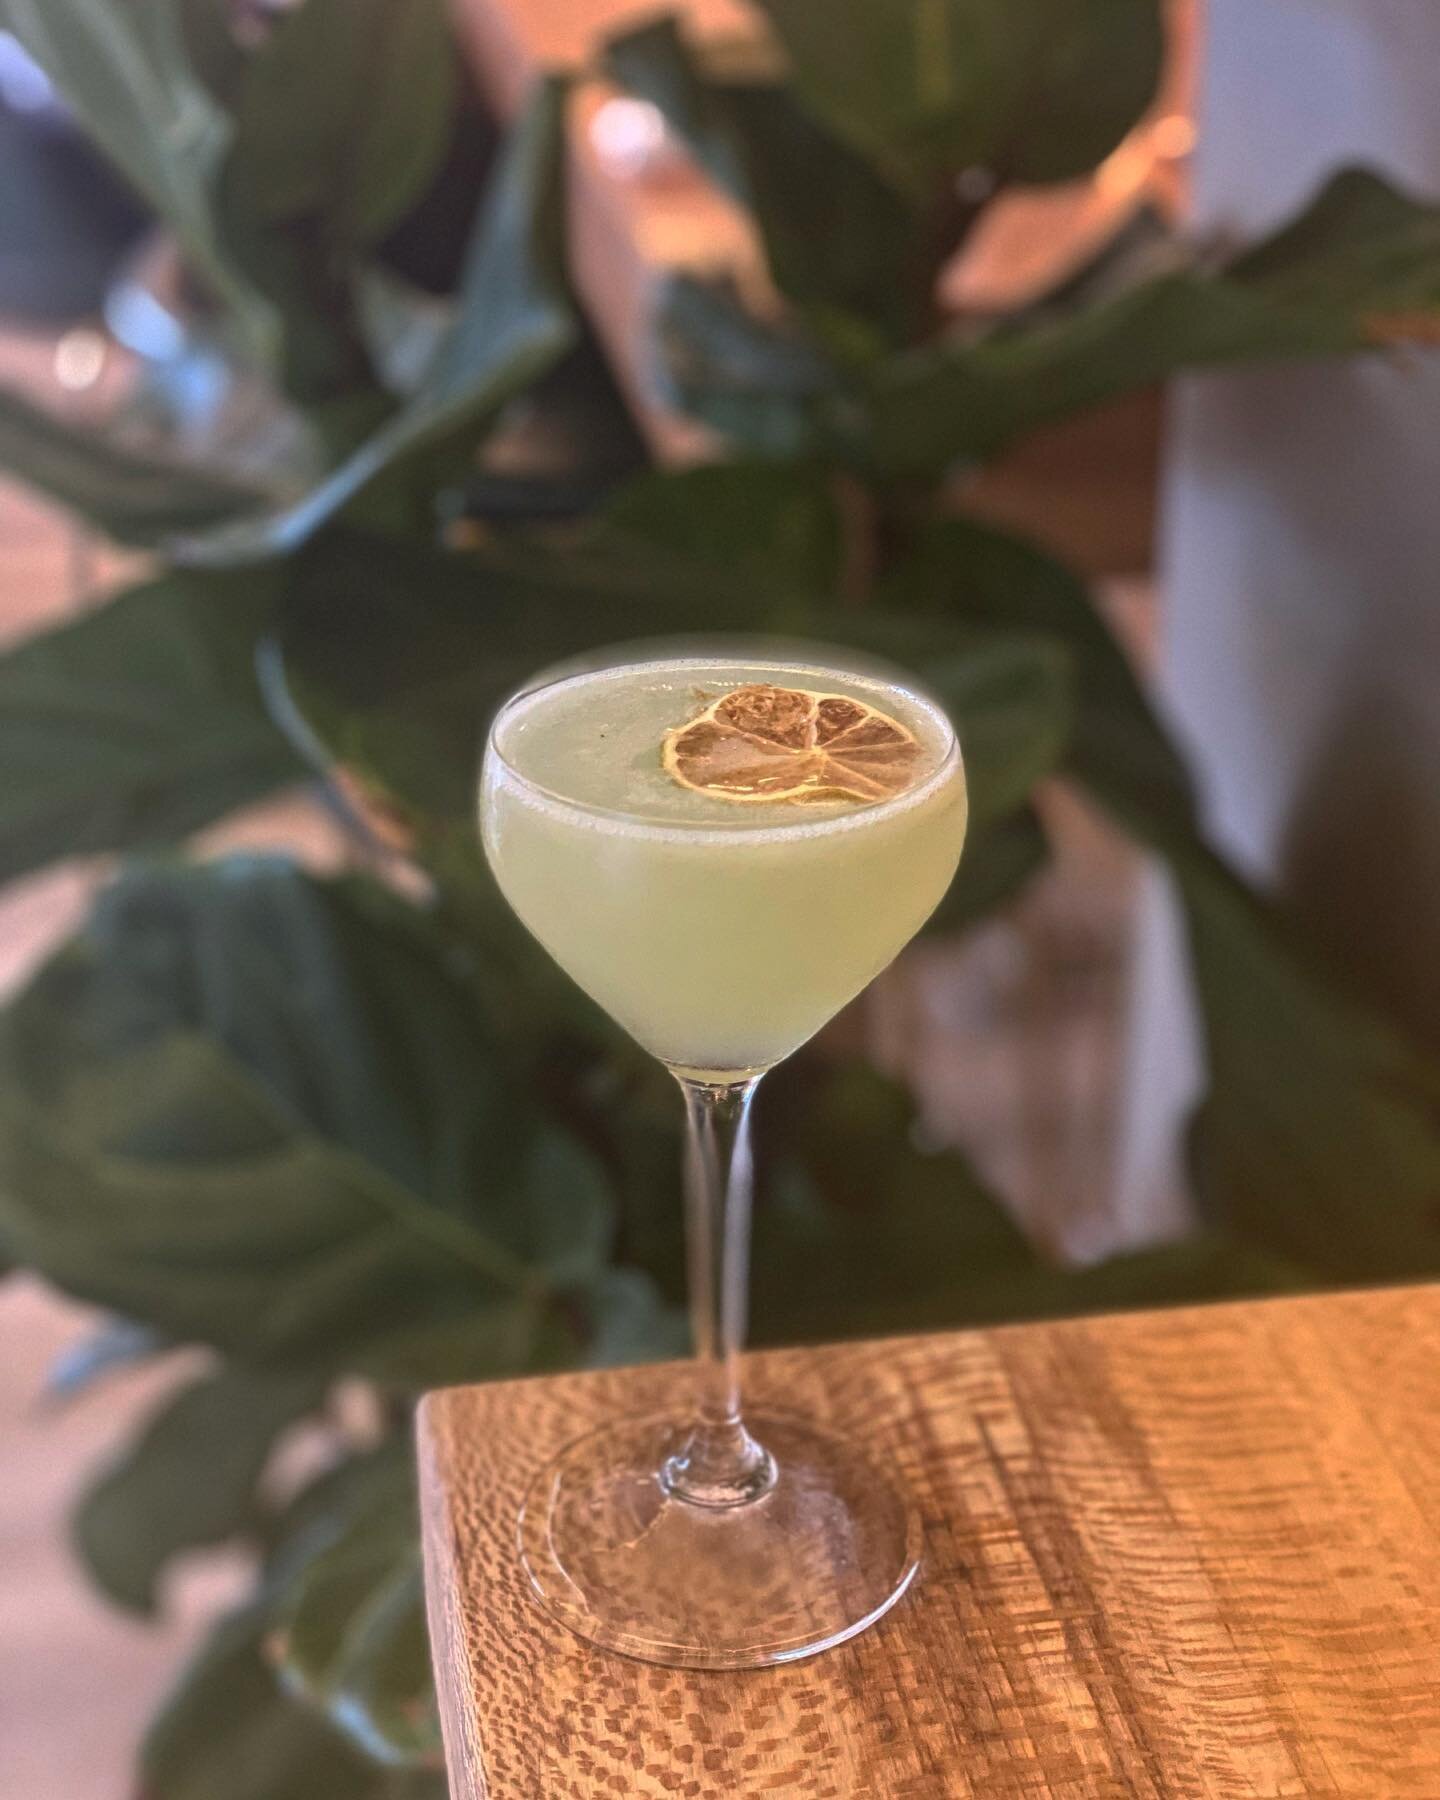 The Last Word 💚
 gray whale gin, green chartreuse, lime juice, St. Germaine 
.
.
.
.
#thelastword #gin 
#graywhalegin #stgermain 
#gindrinks #westchester 
#rye #mixologist